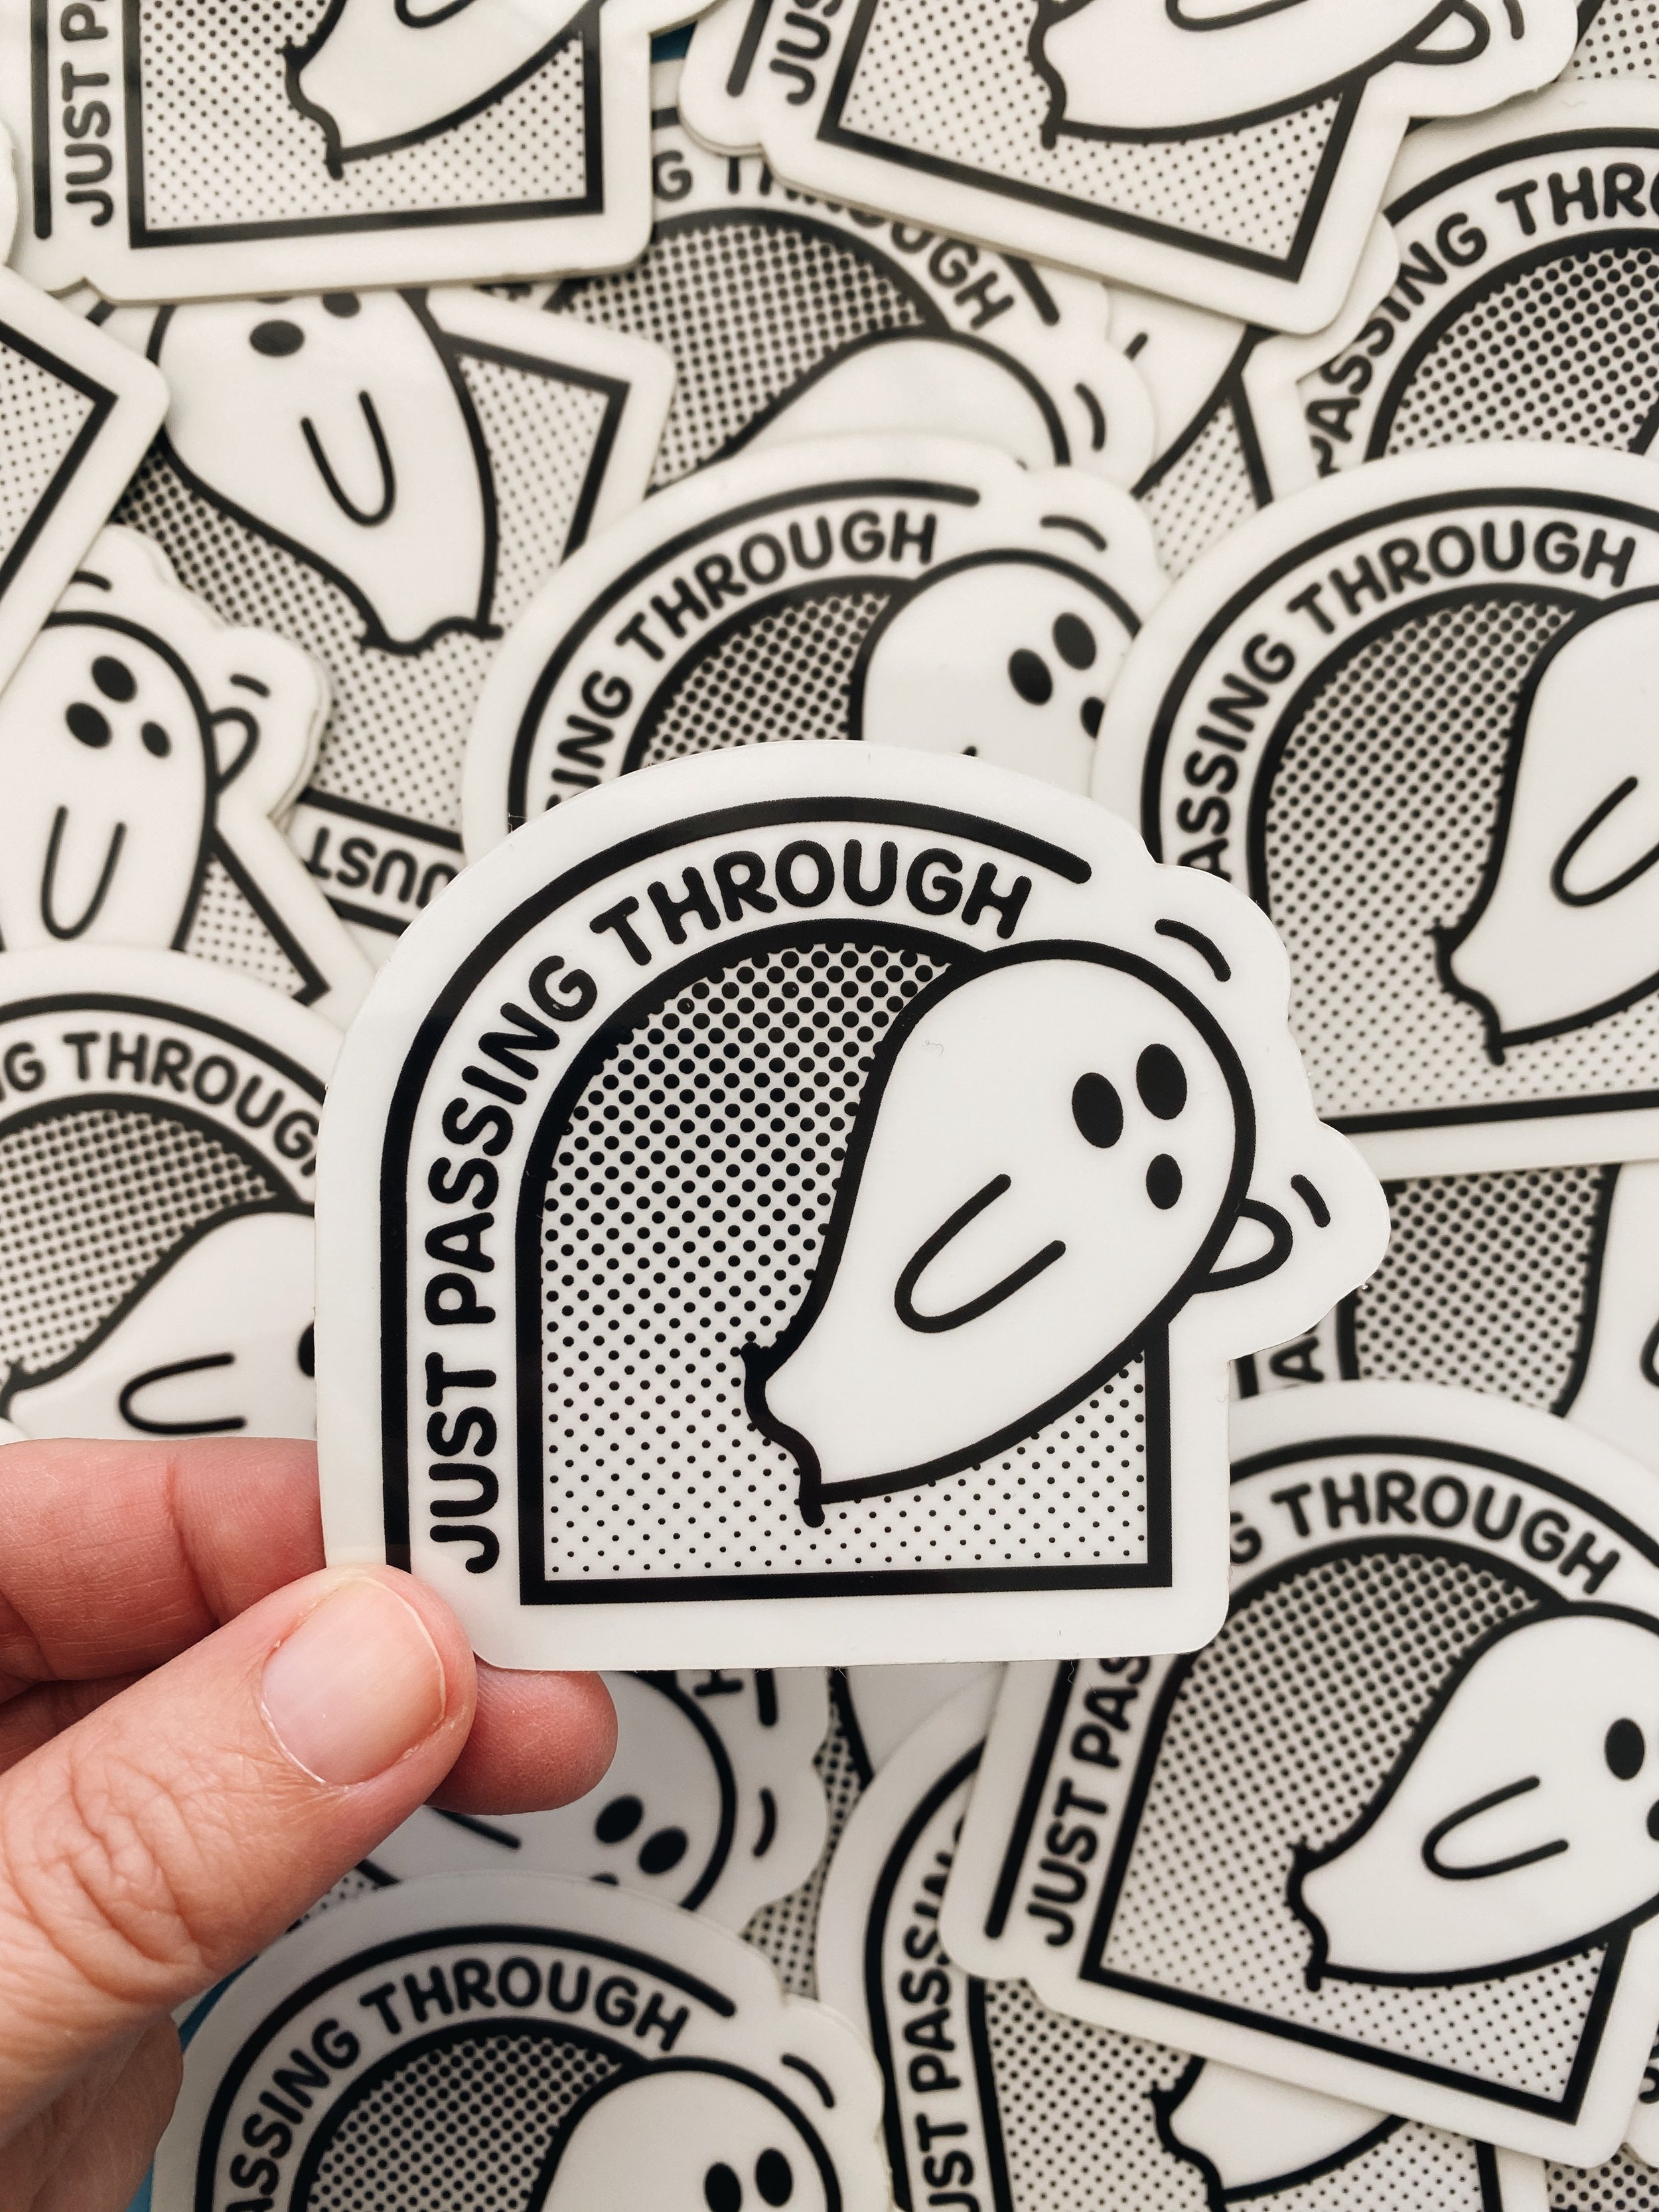 Passing Through Glow in the Dark Sticker — Recovering Lazyholic